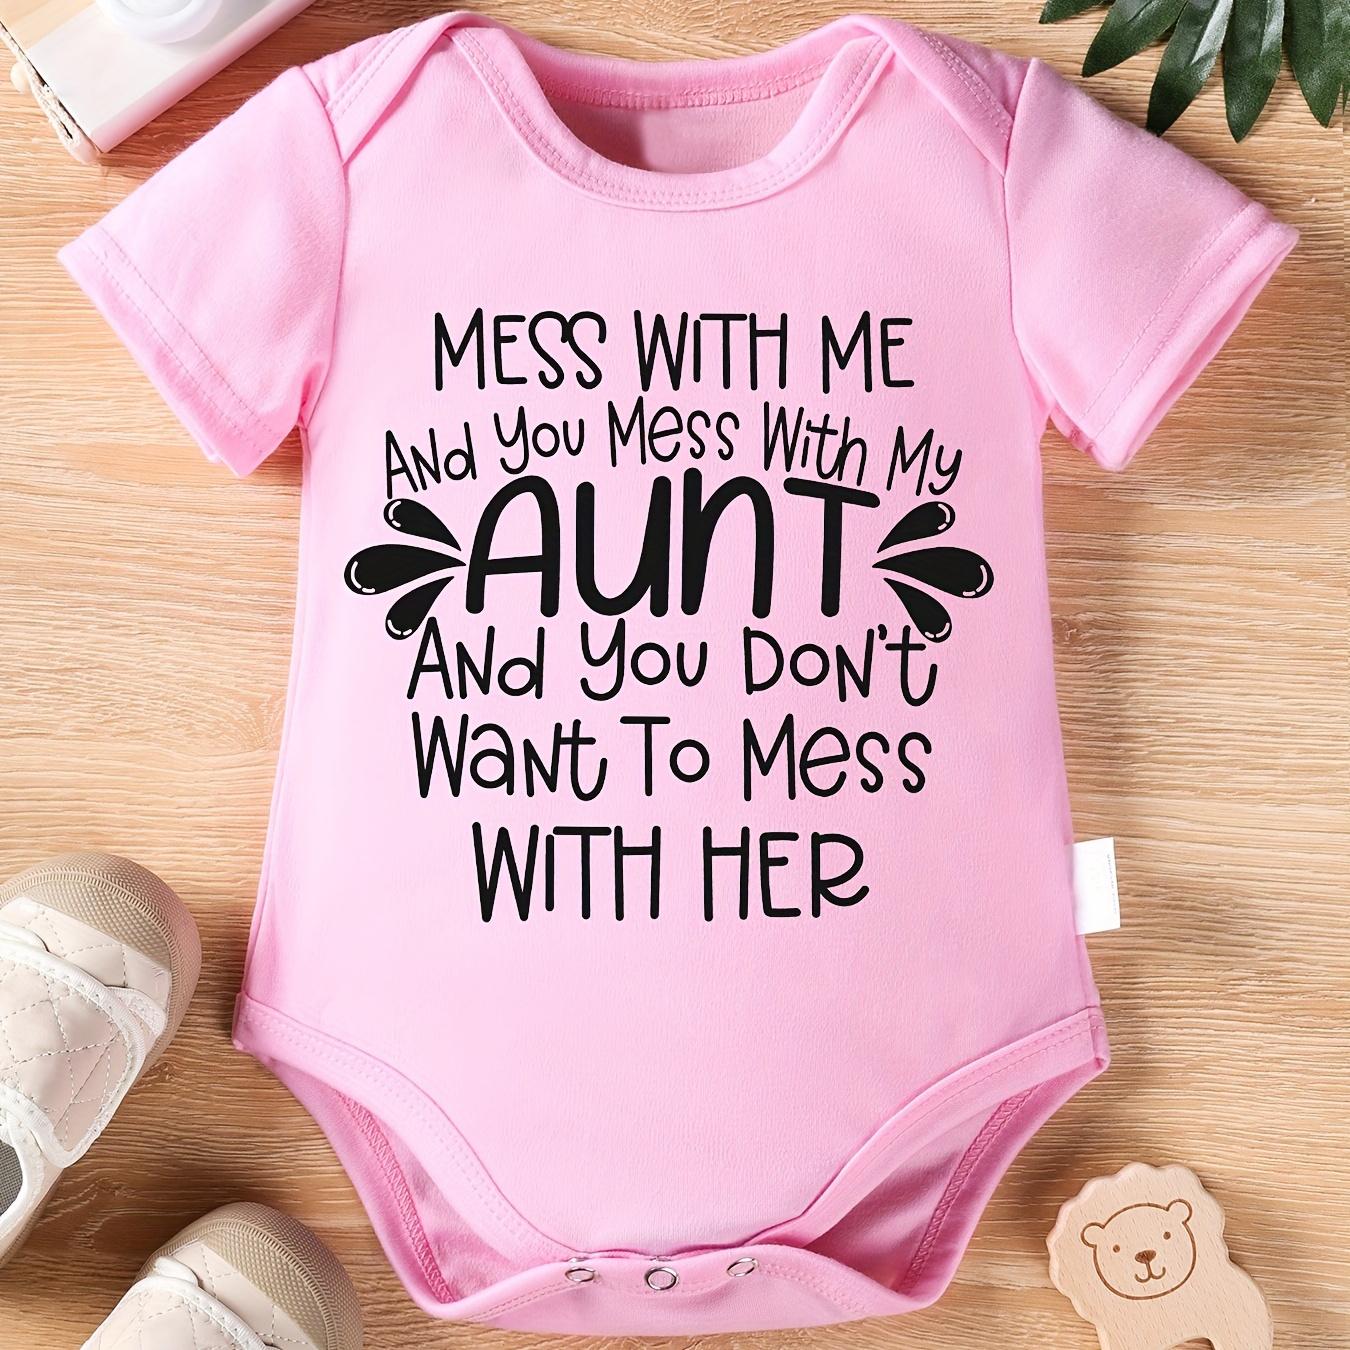 

Baby Girls Triangle Bodysuit, Mess With Me And You Mess With My Aunt And You Don't Want To Mess With Her Print Newborn Cute Short Sleeve Baby Triangle Romper Bodysuit Clothing